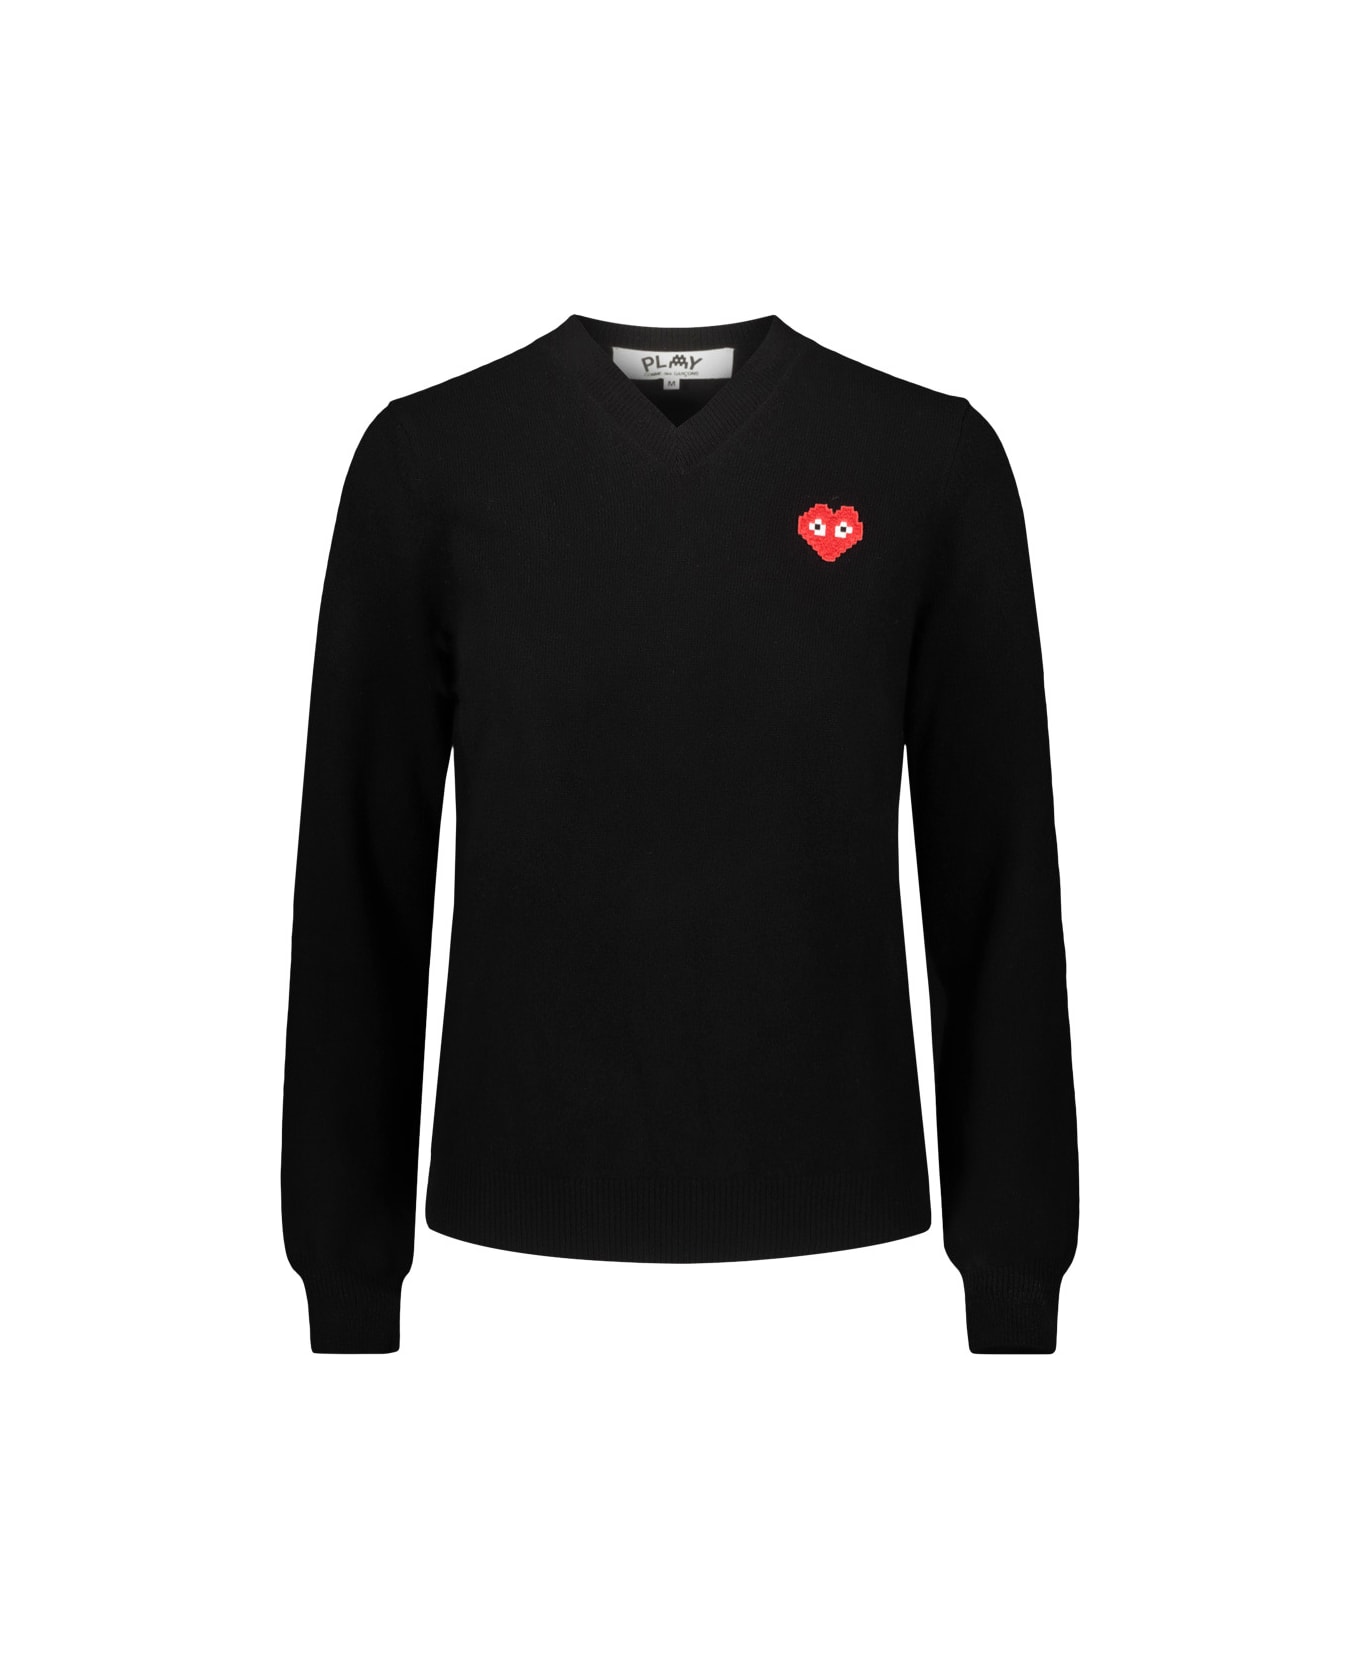 Comme des Garçons Play V-neck Sweater With Red Pixelated Heart - Blk ニットウェア